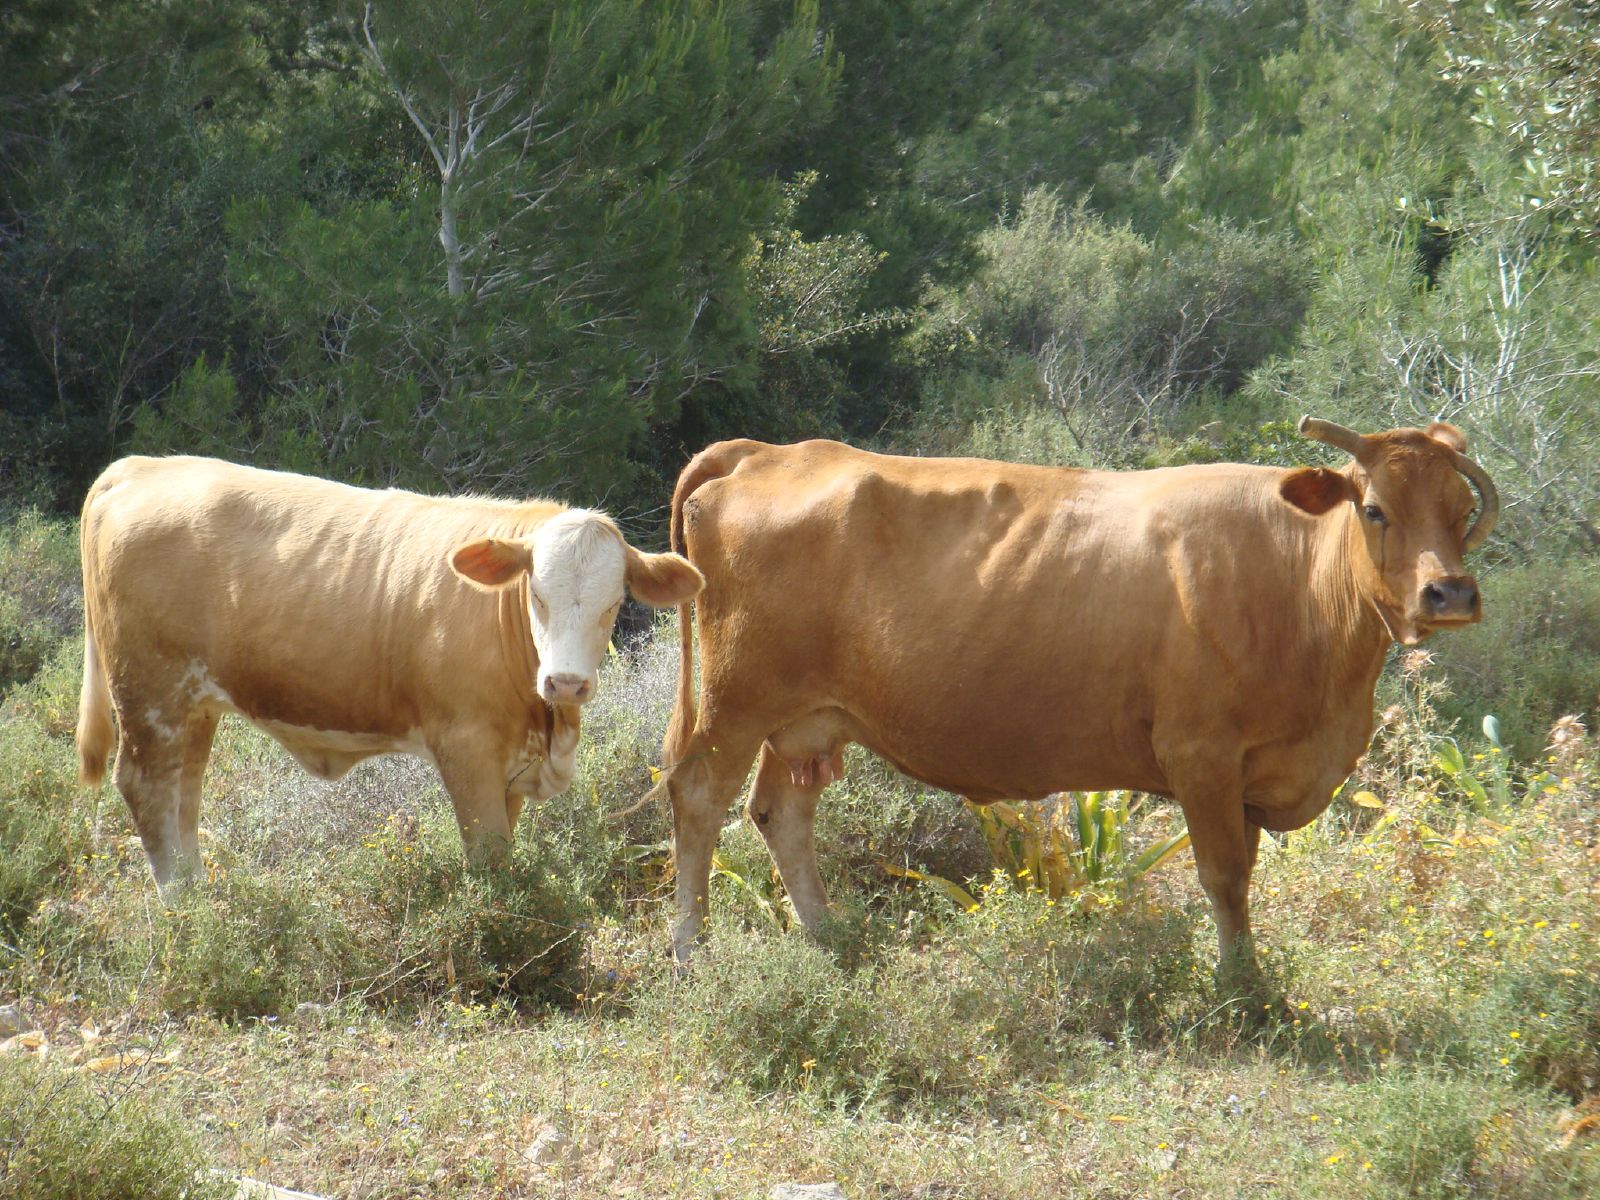 two cows standing in an open field with trees behind them